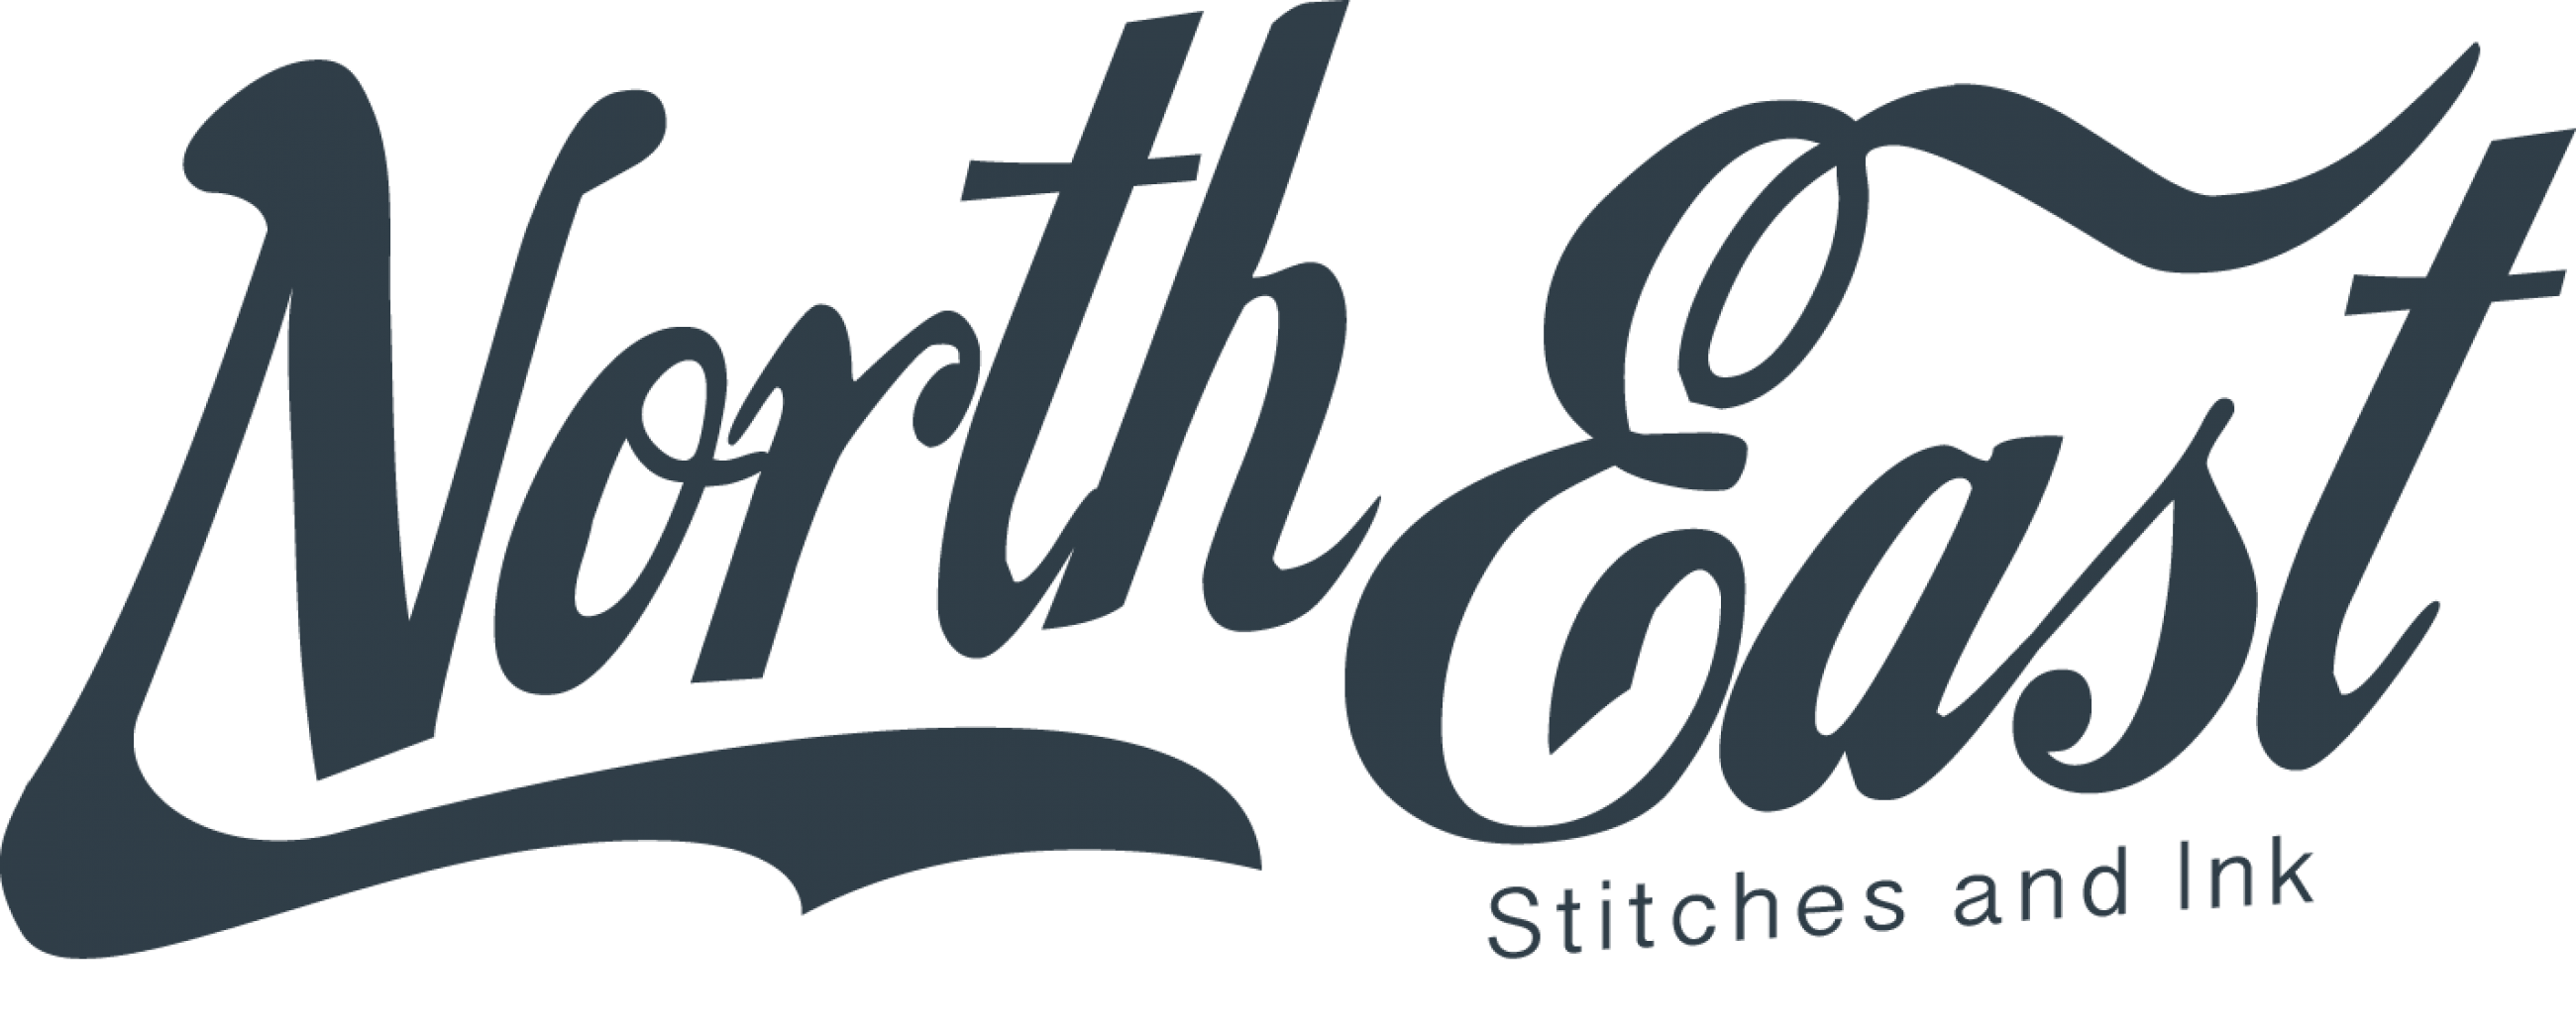 Northeast Stitches and Ink